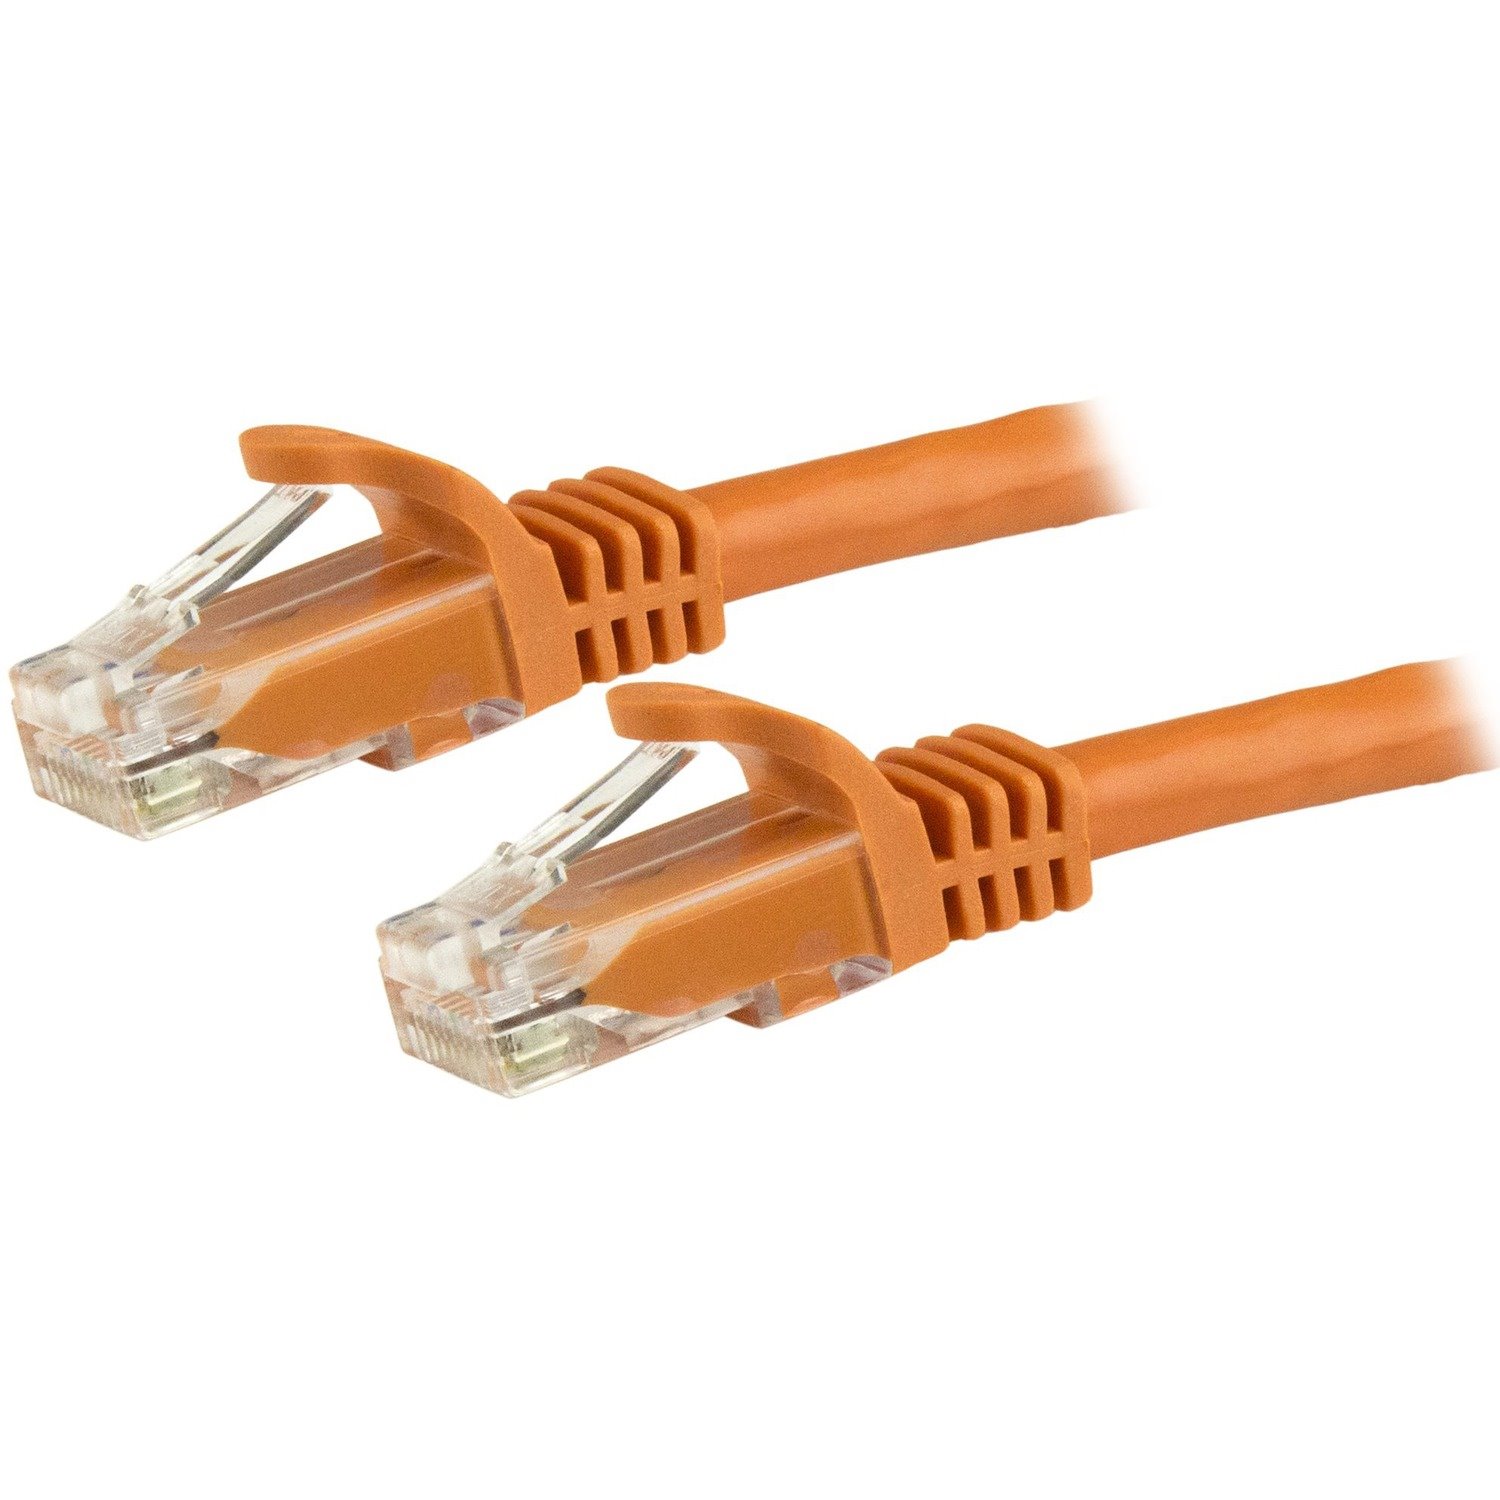 StarTech.com 15 m Category 6 Network Cable for Network Device, Hub, Distribution Panel, Workstation, Wall Outlet, IP Phone - 1